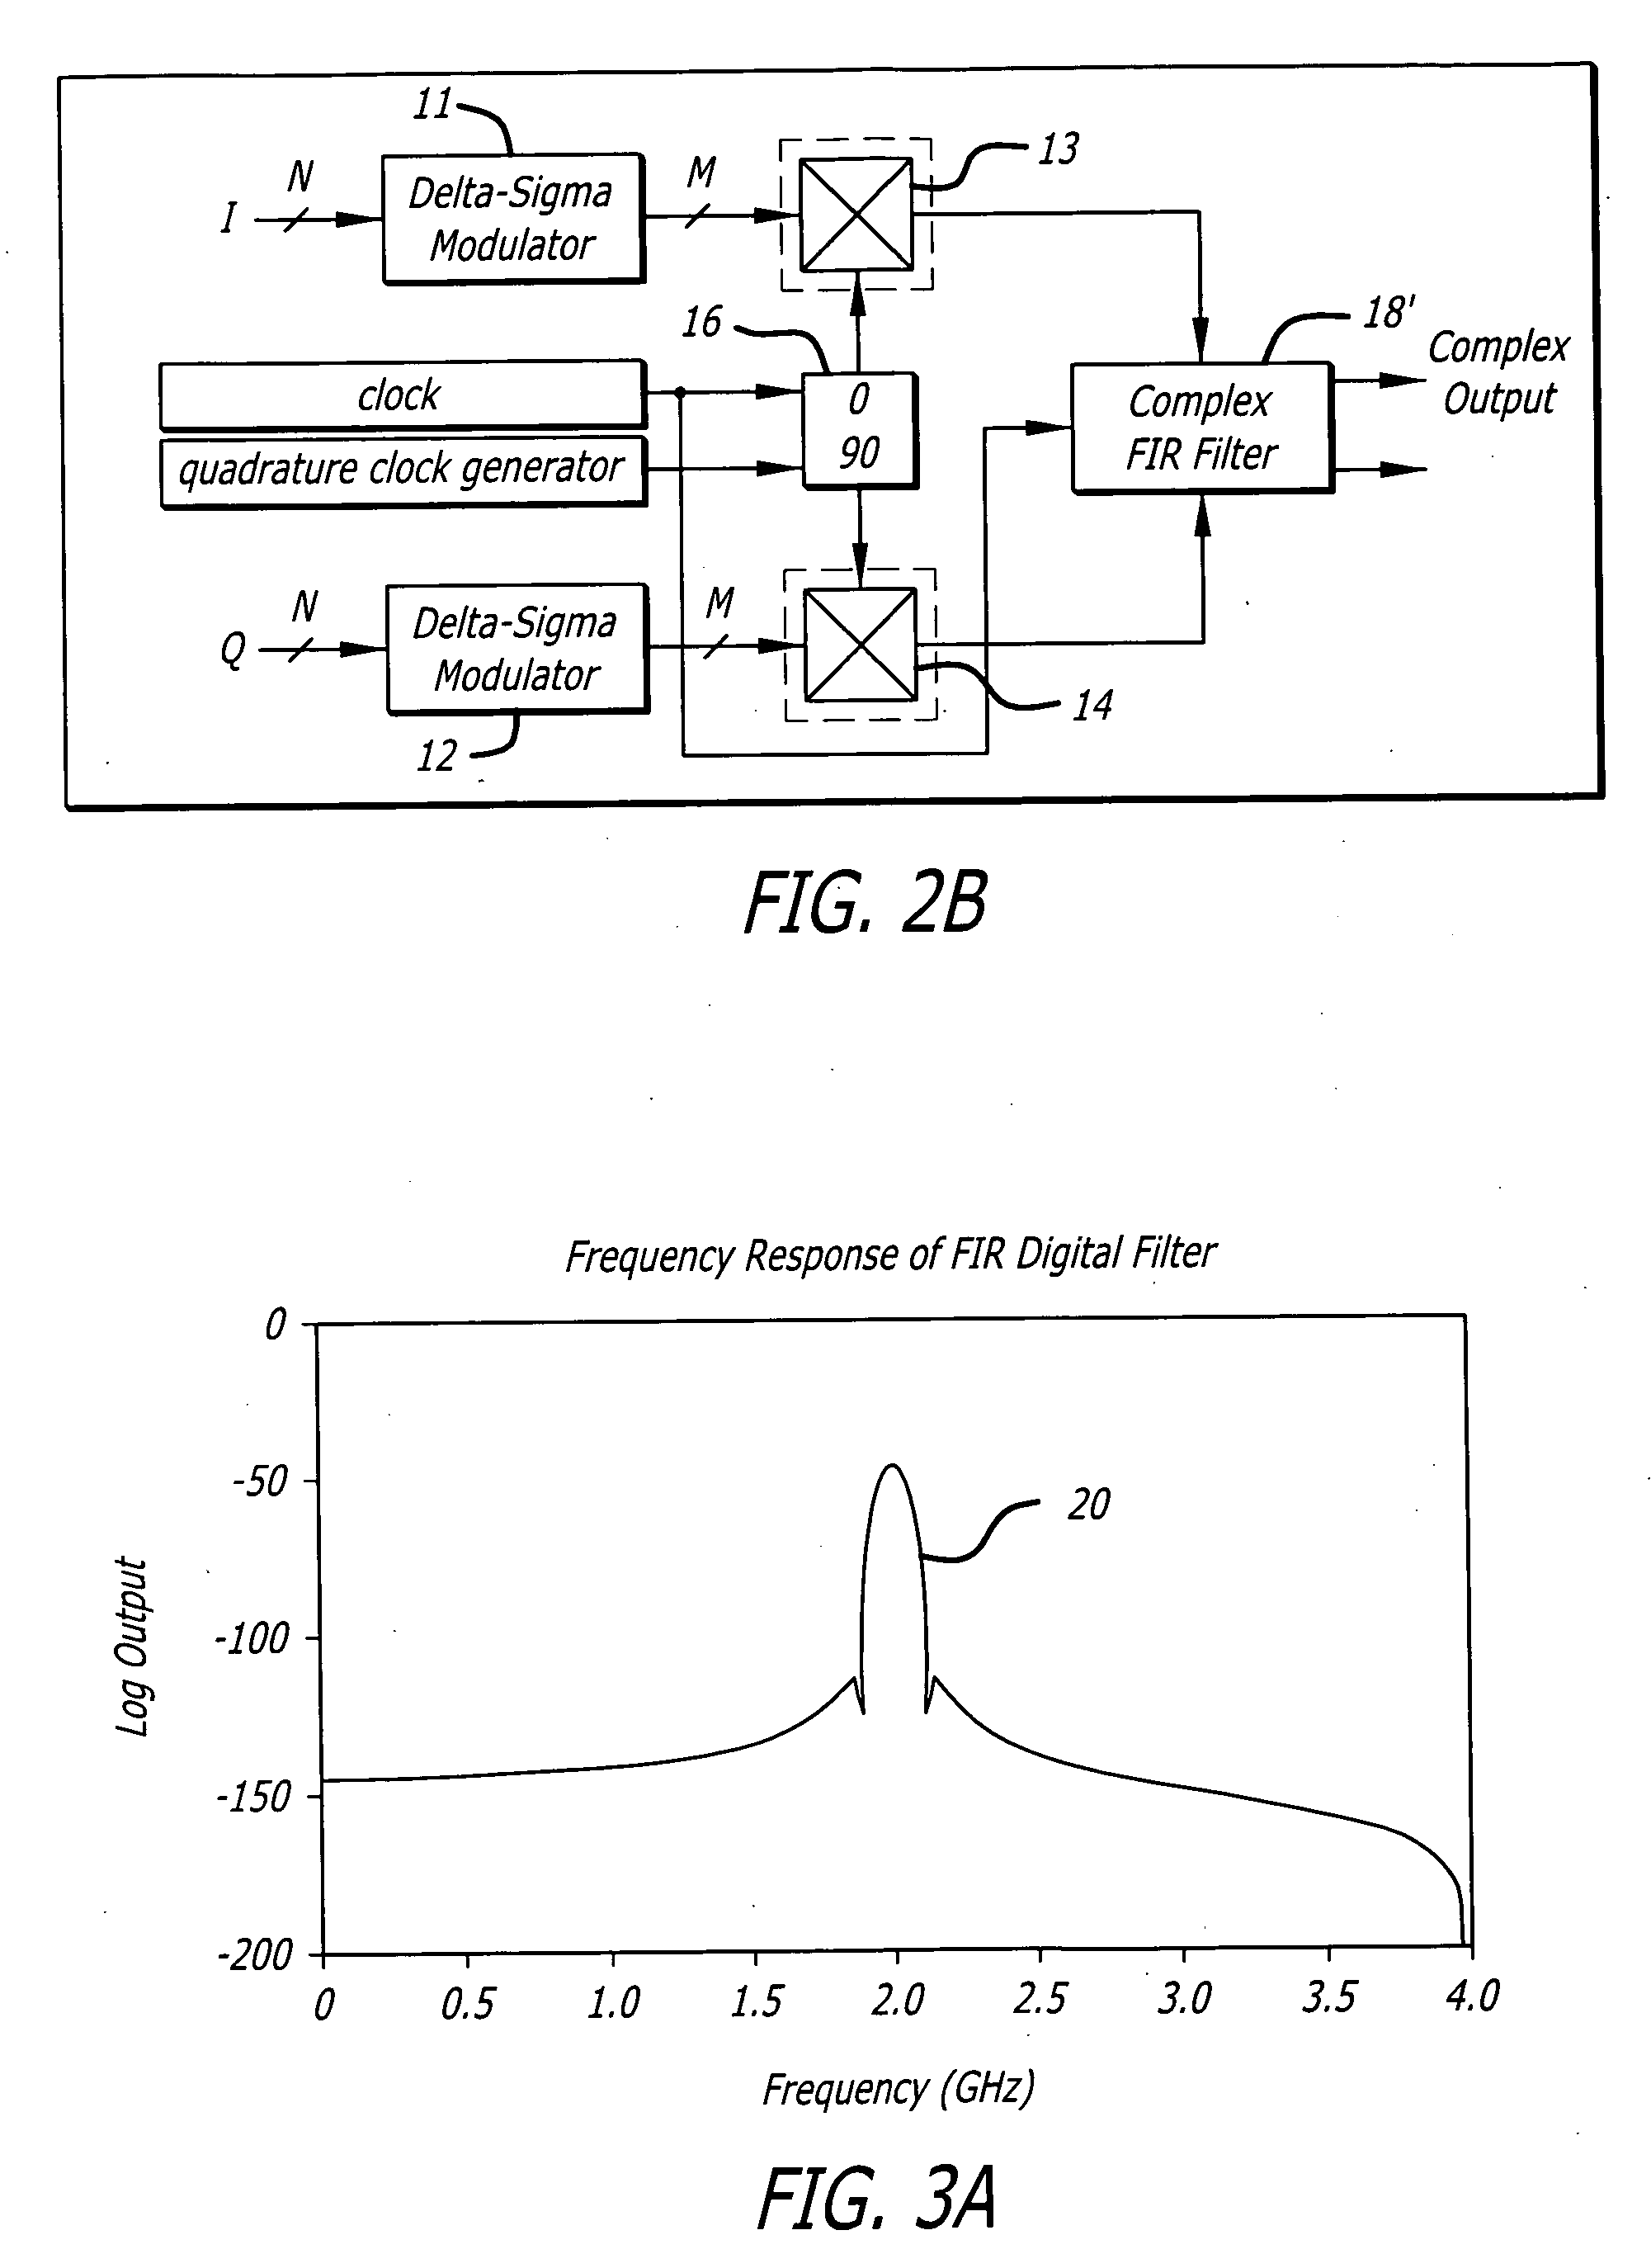 Self-tuning output digital filter for direct conversion delta-sigma transmitter